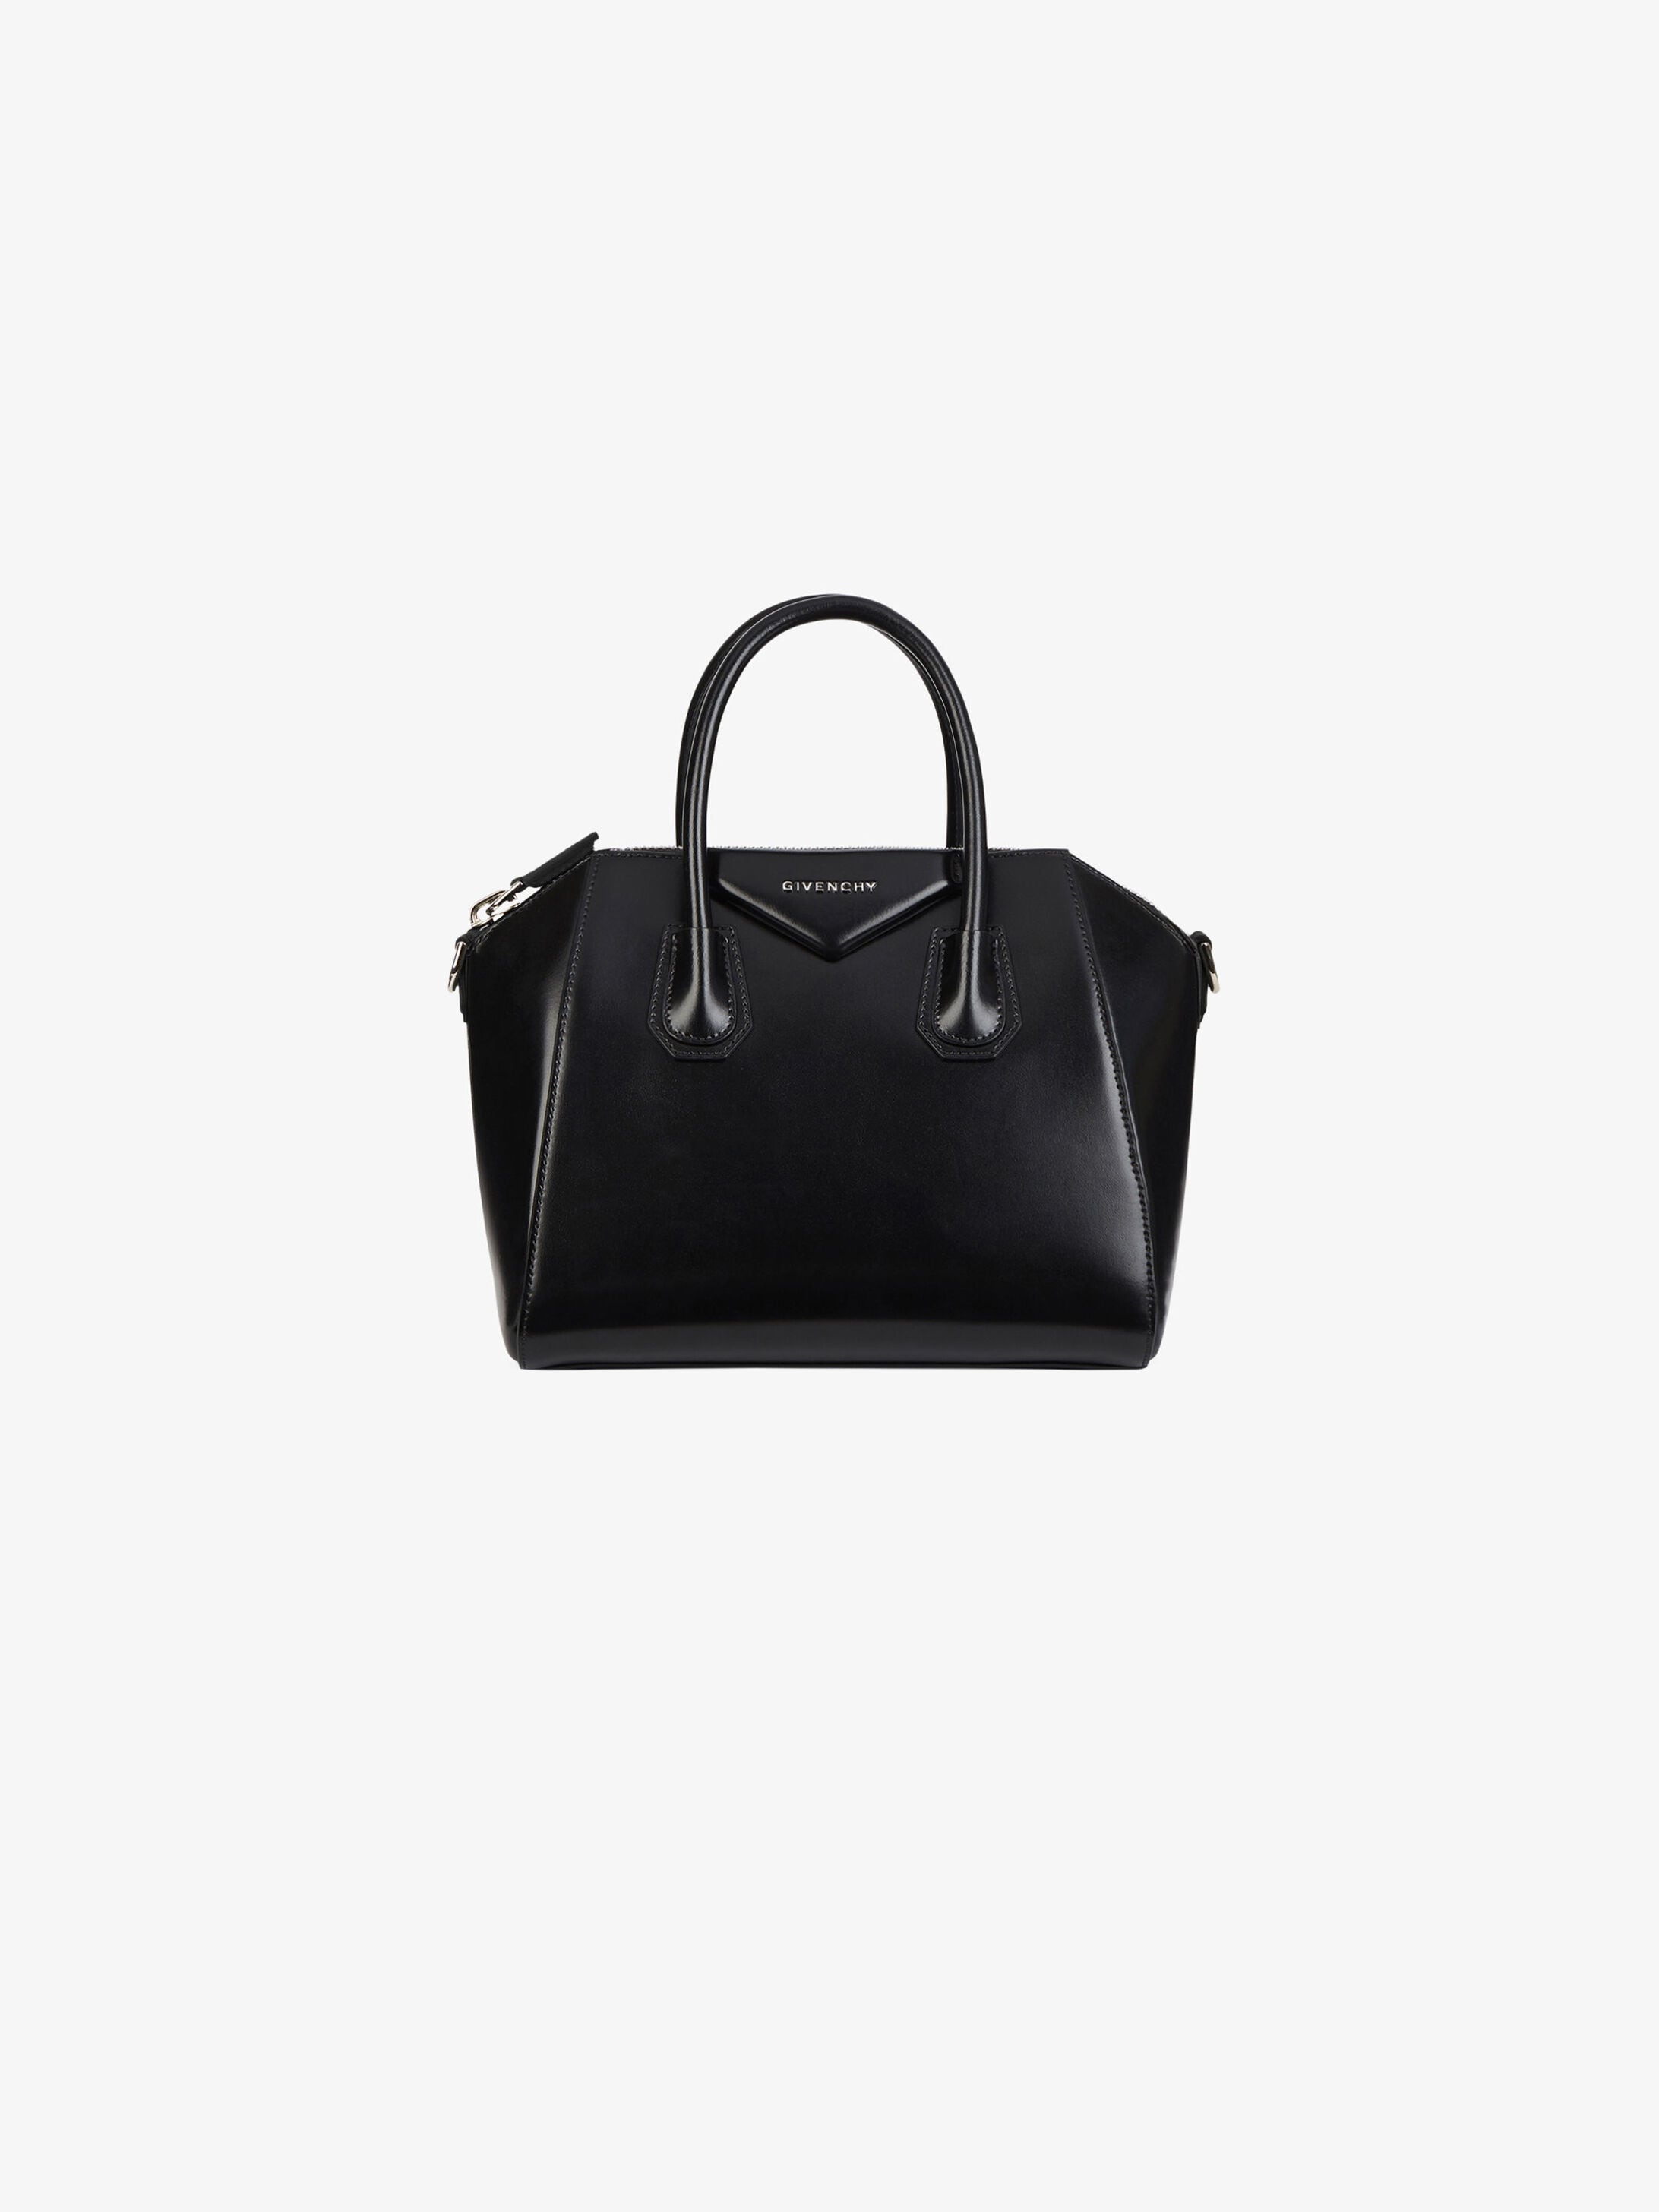 givenchy mini bags Off 79% - www.gmcanantnag.net